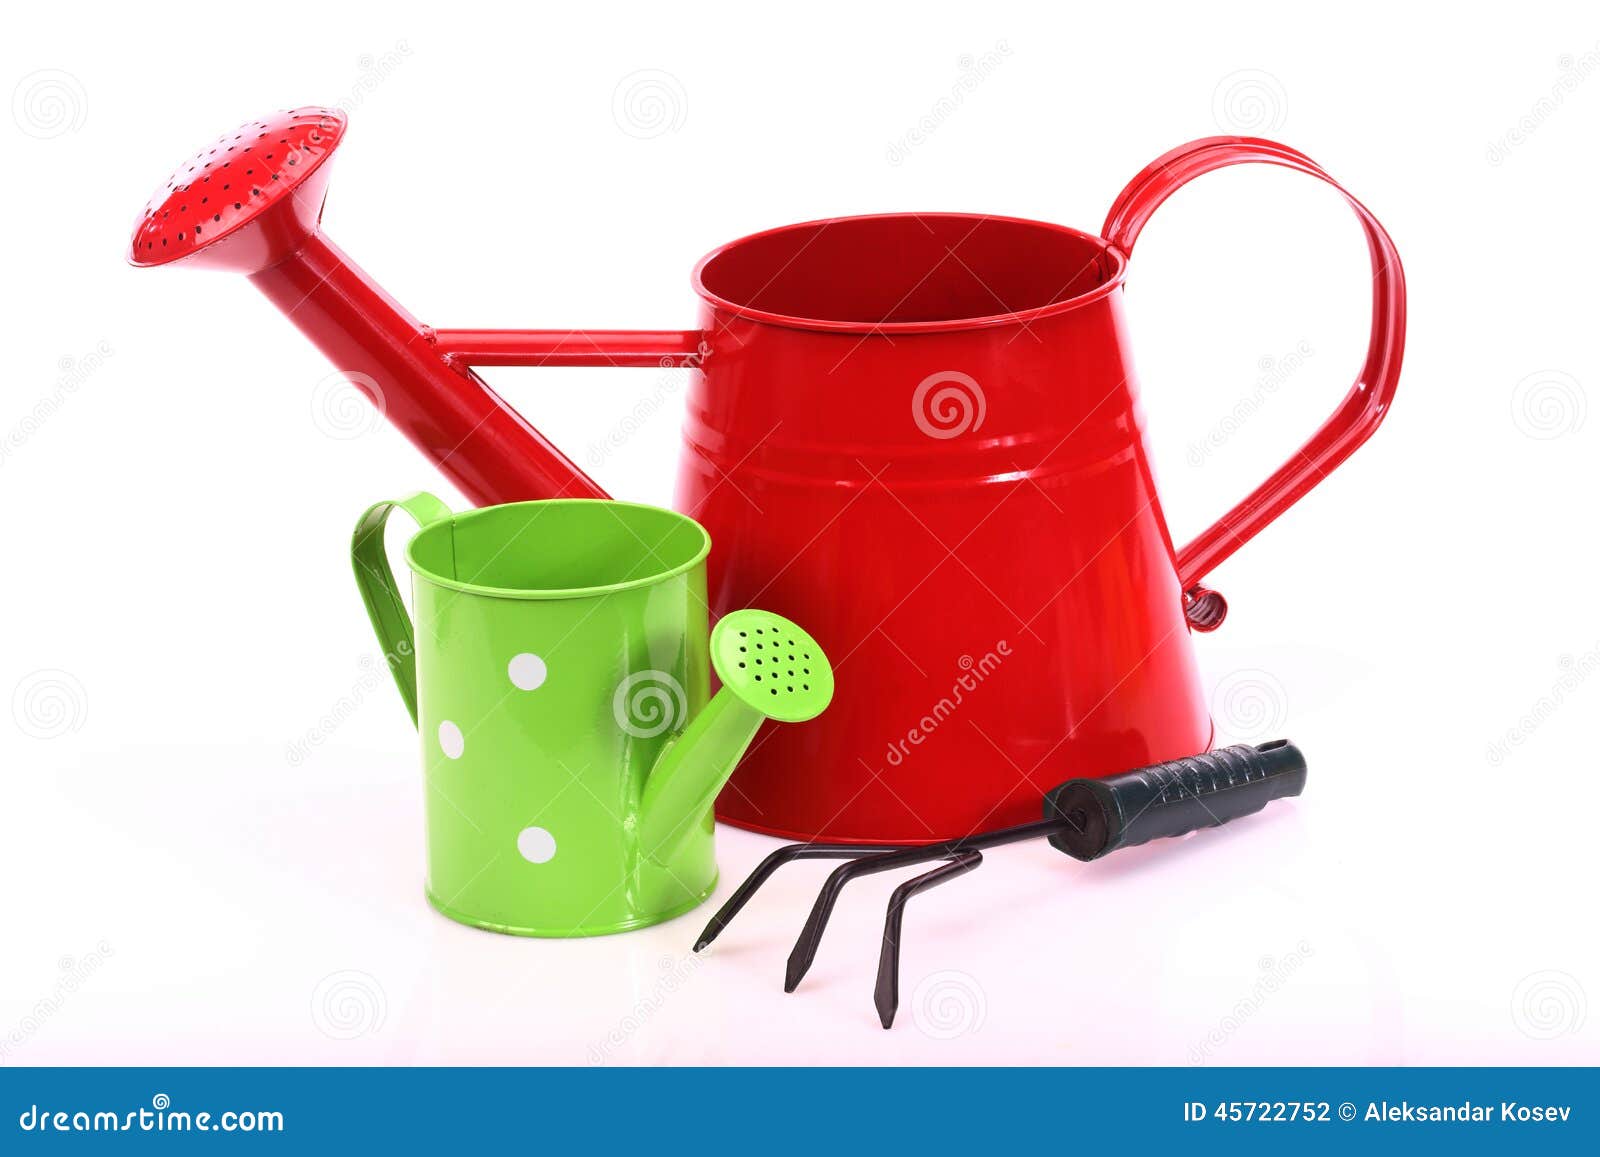 Watering cans stock photo. Image of metal, background - 45722752